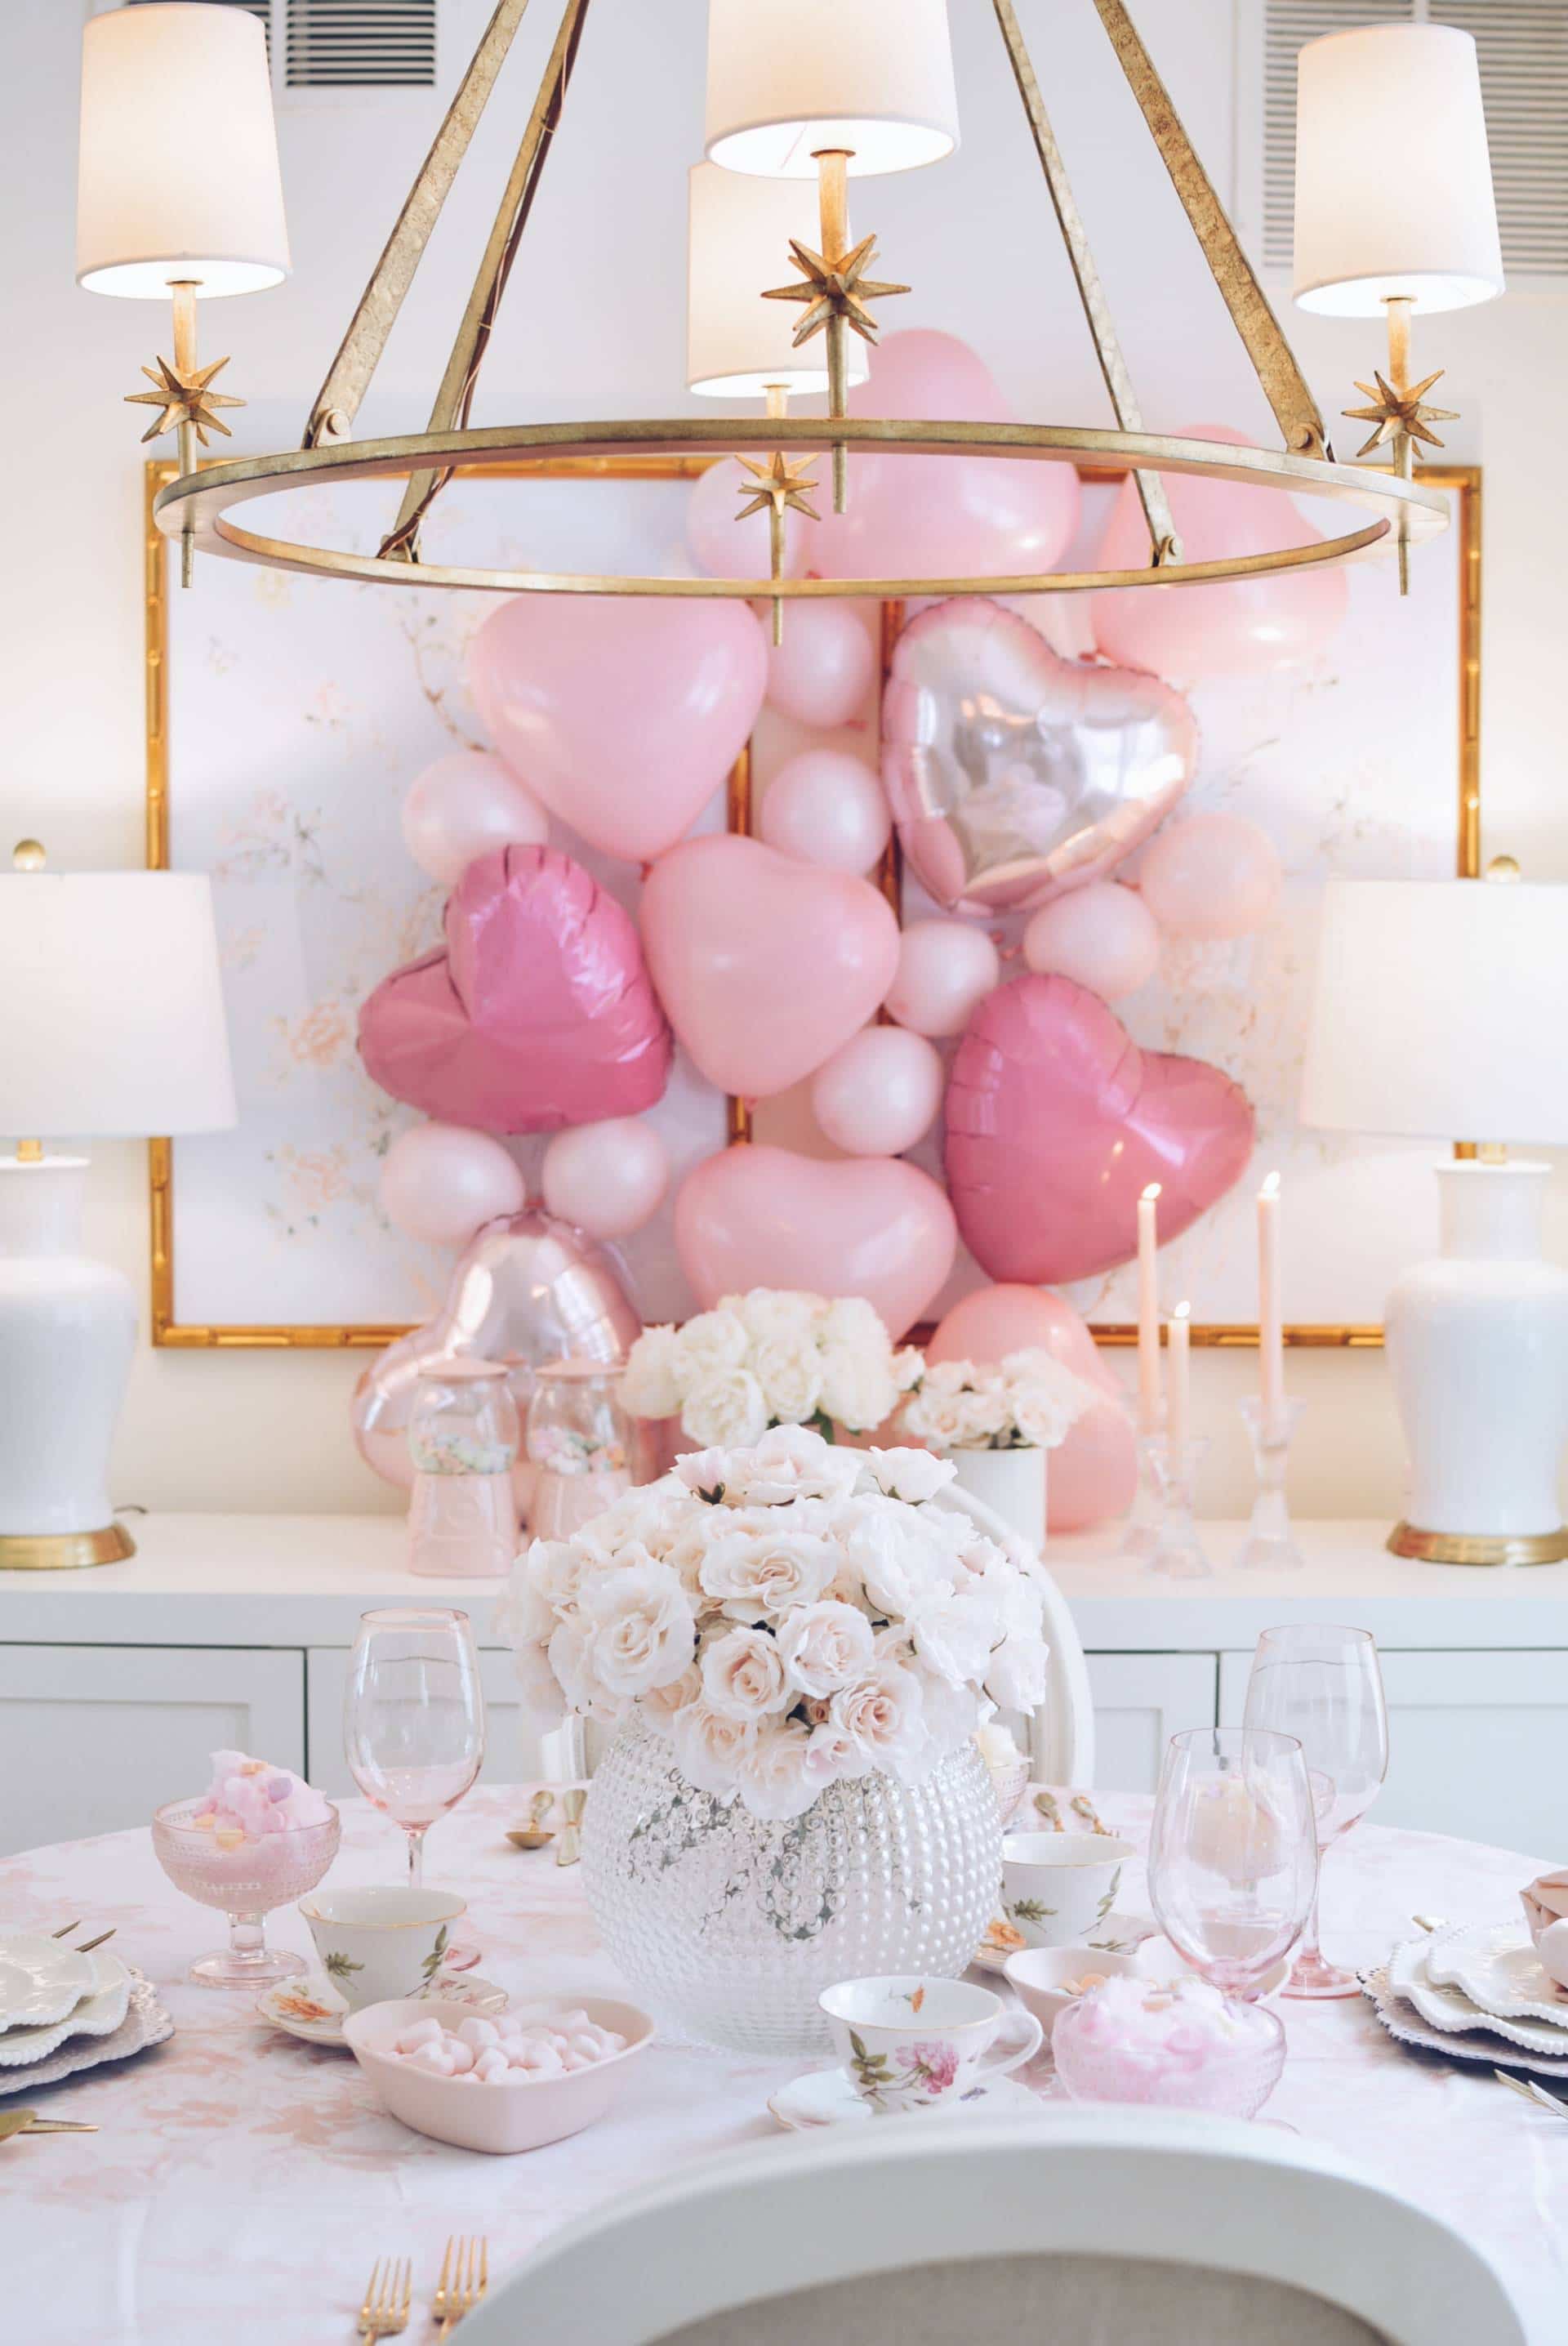 A Pink Valentine's Day Table Decor & Ideas - The Pink Dream